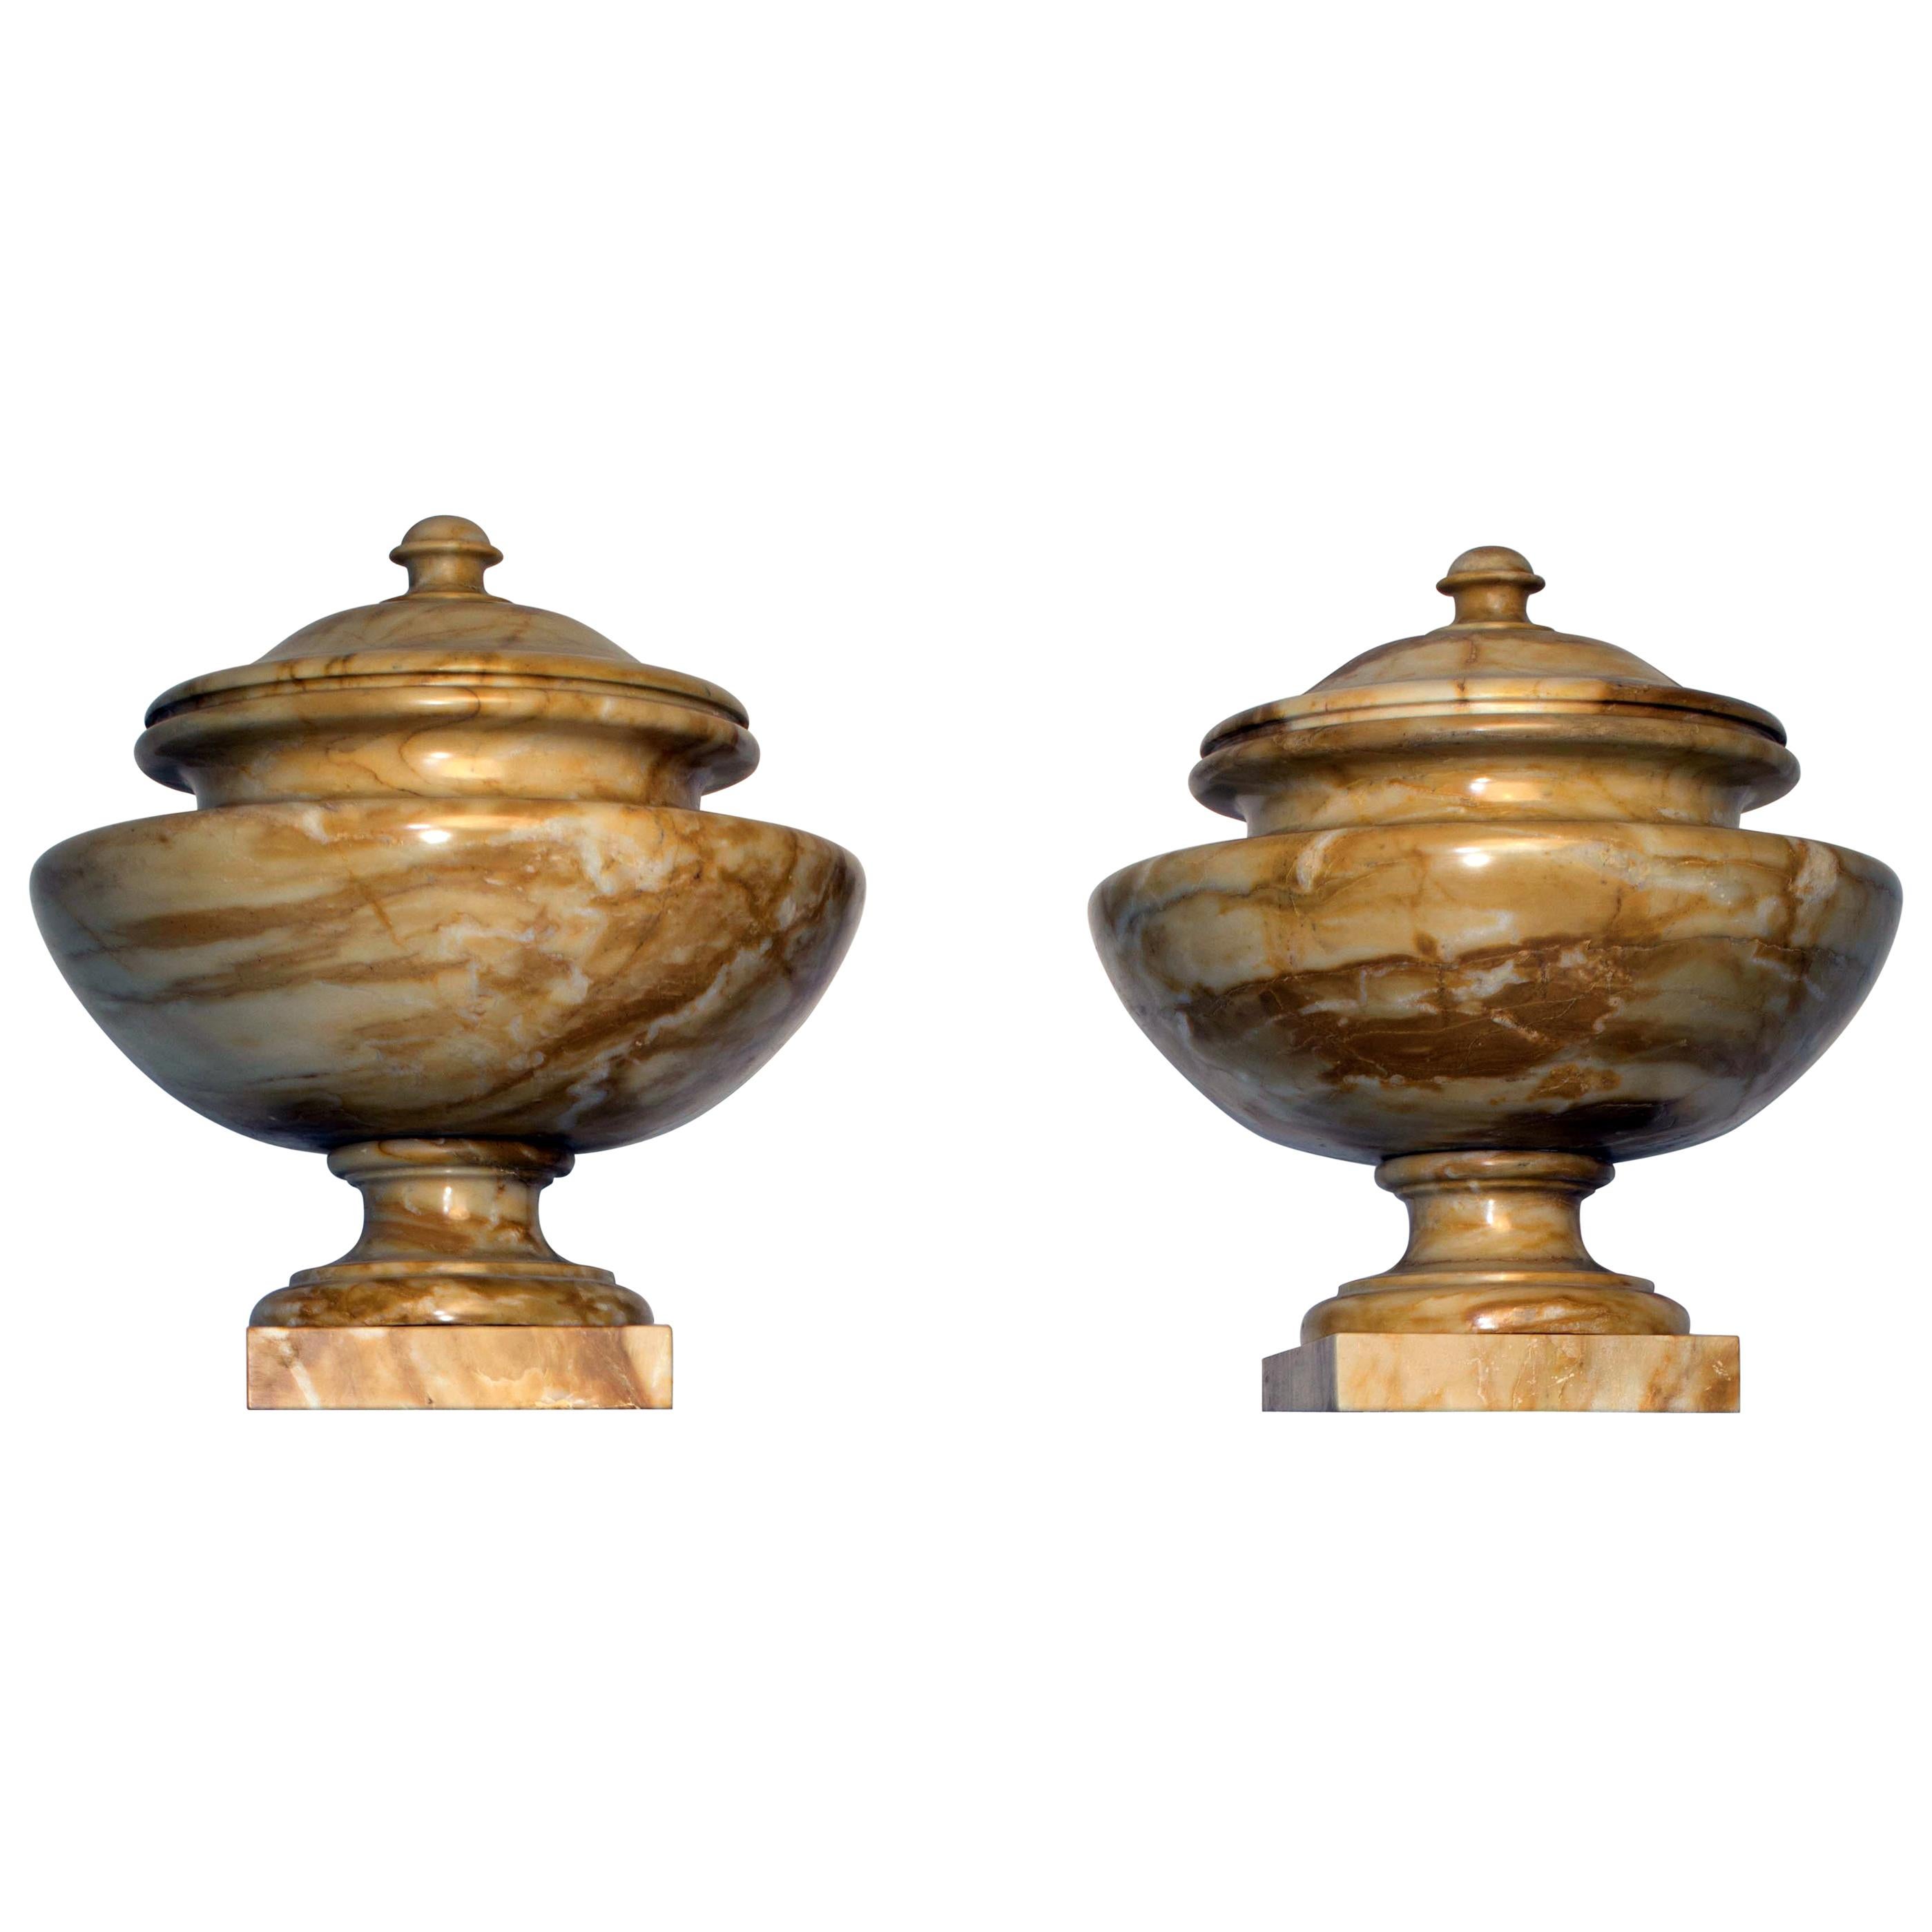 Neoclassical Italian Tuscany Marble Siena Yellow Pair of Urns For Sale